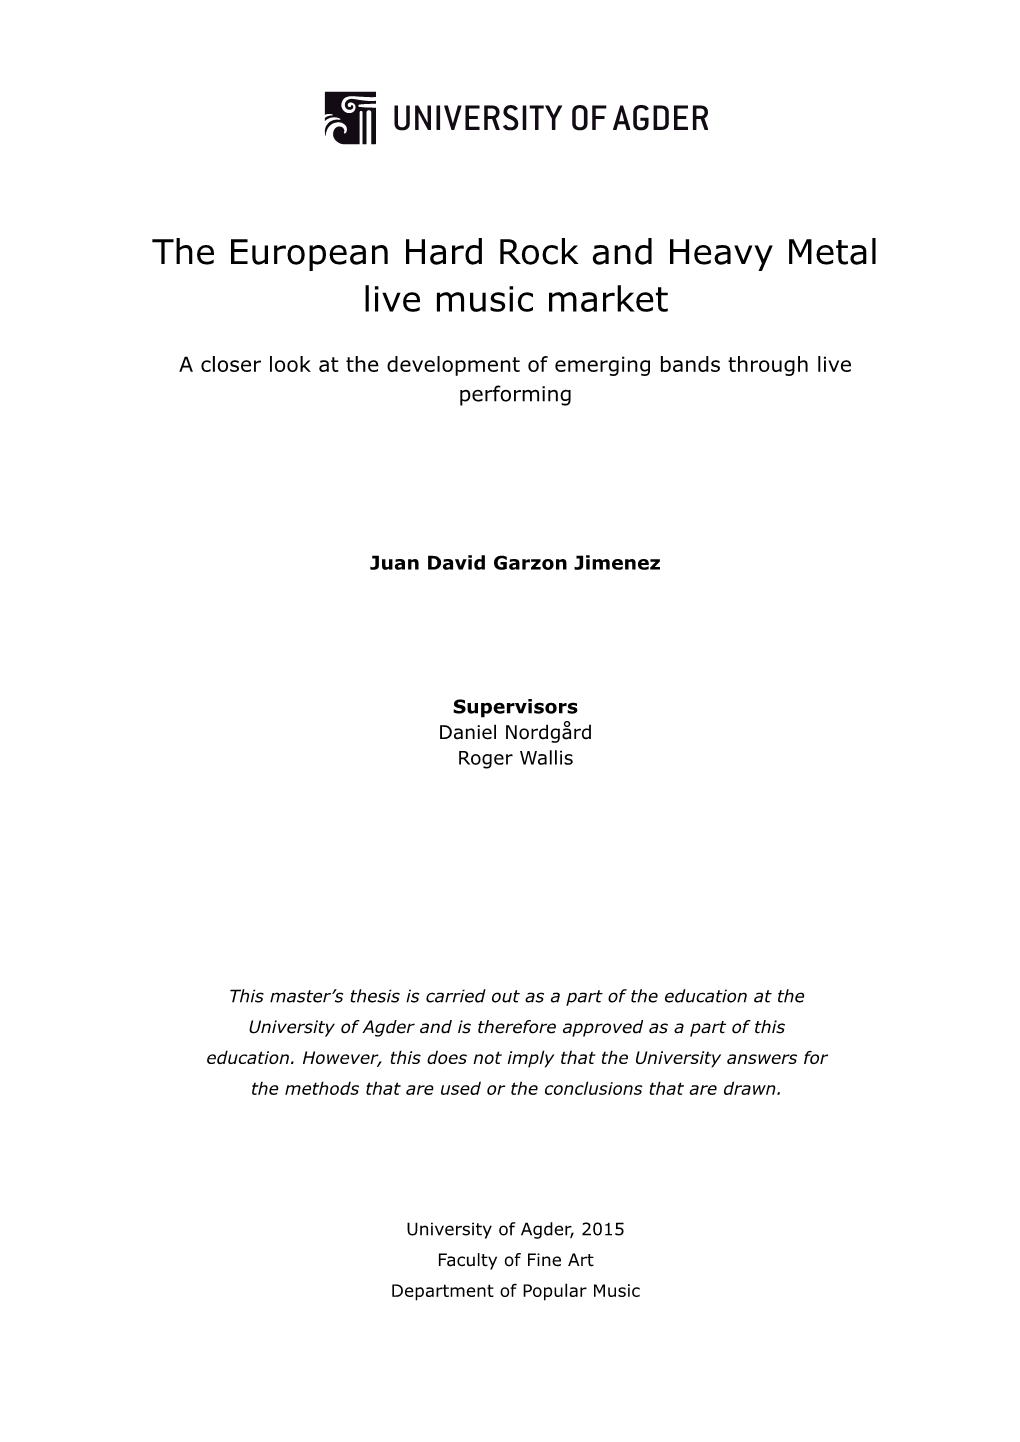 The European Hard Rock and Heavy Metal Live Music Market